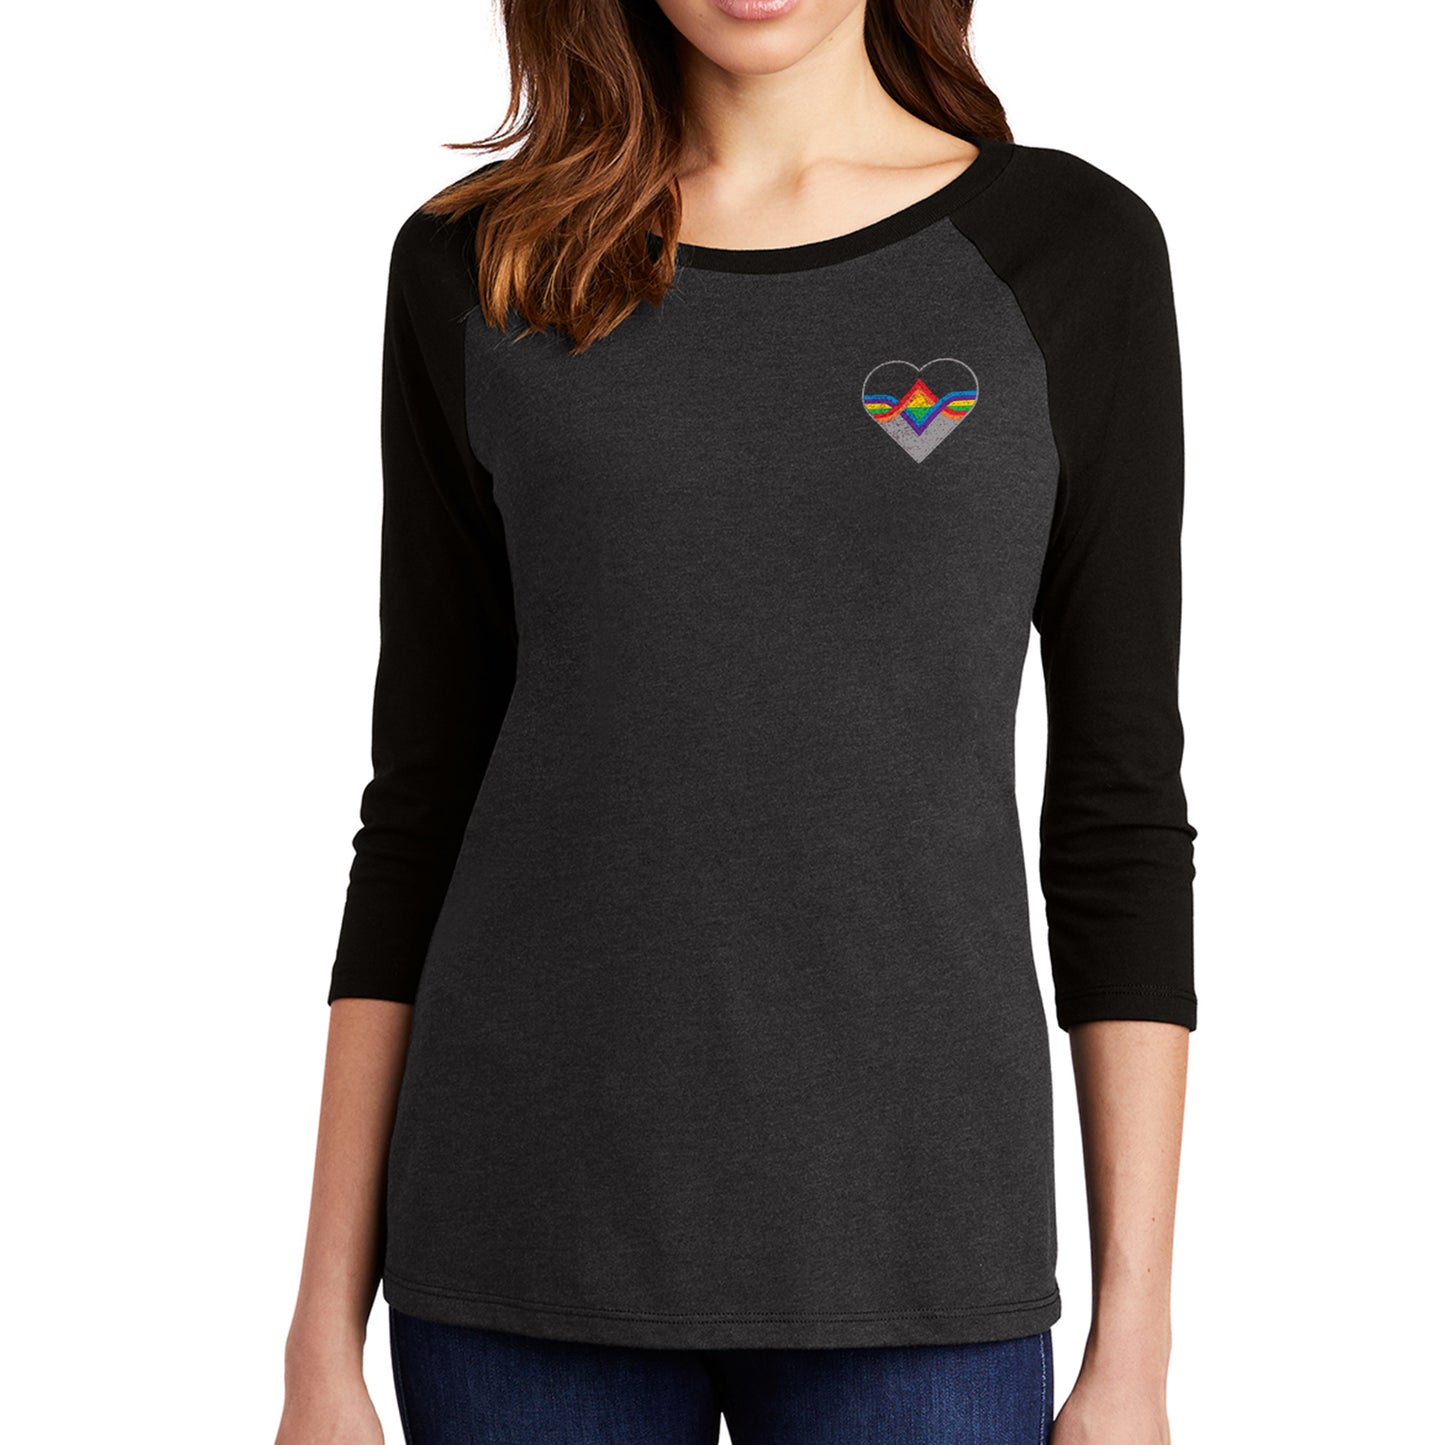 A female model wearing a grey longsleeve shirt with black sleeves. The Acting Ensign Pride symbol is at the top left corner of the shirt.  The symbol is a grey heart with rainbow lines running through the center.